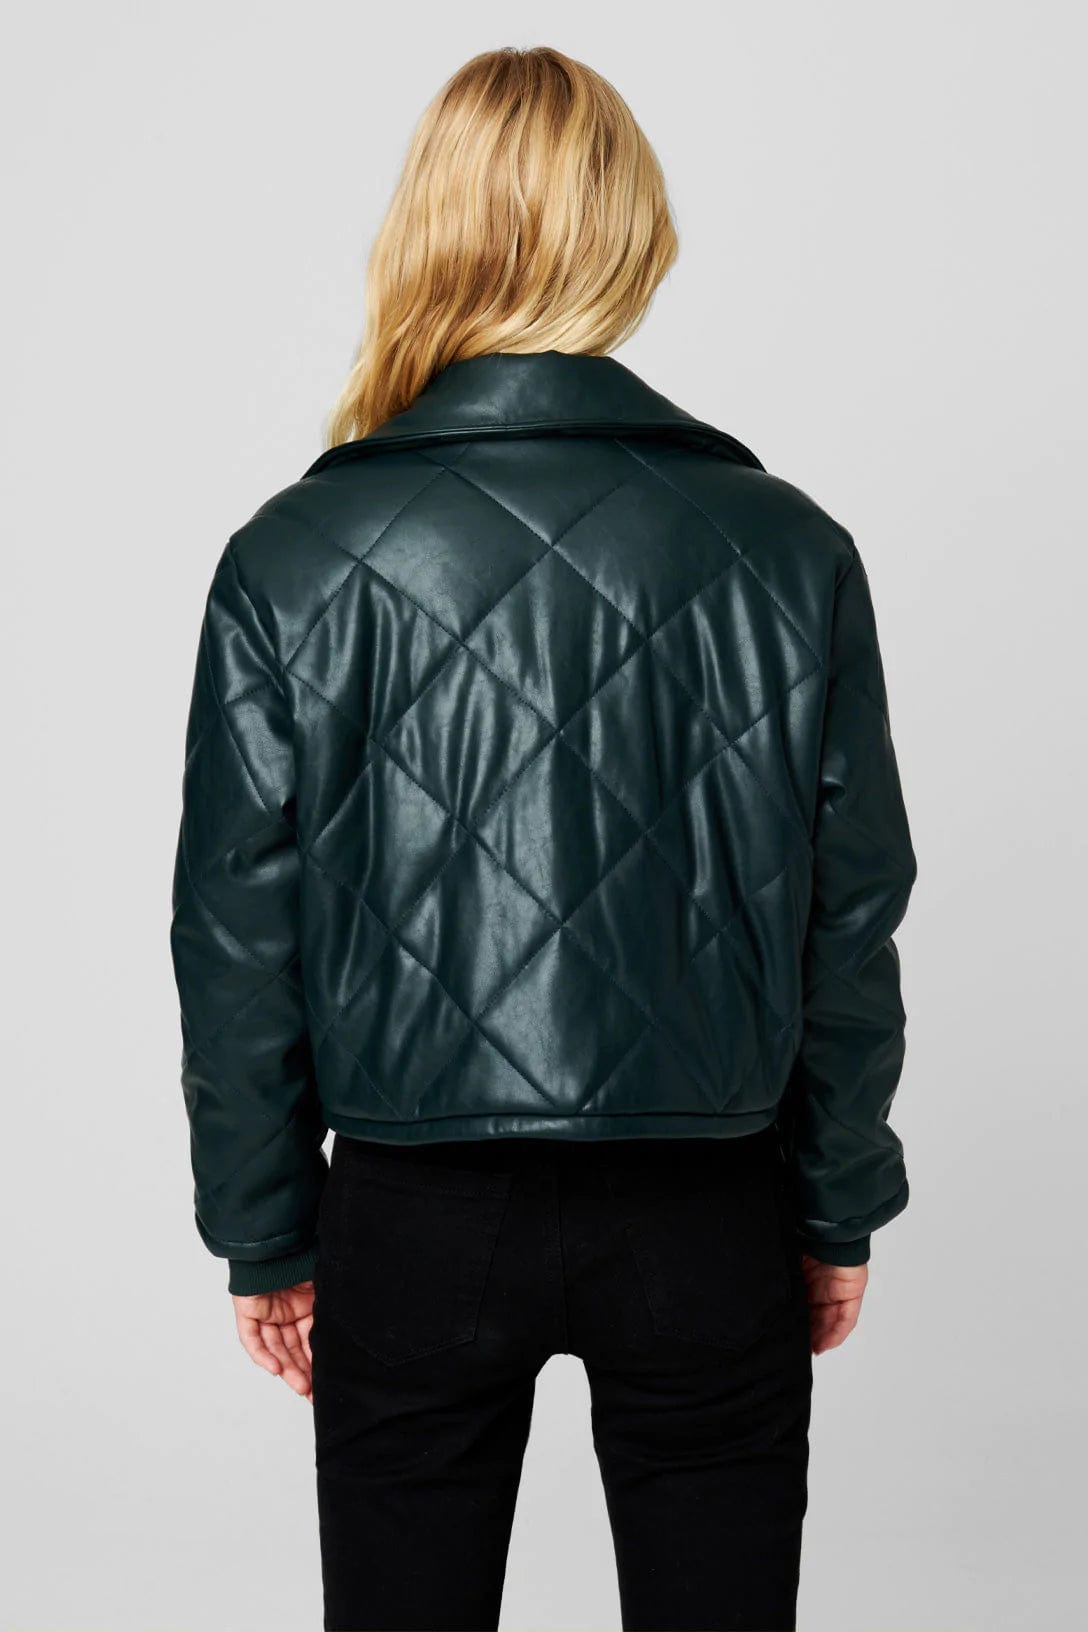 Show And Tell Vegan Leather Bomber Jacket, Jacket by Blank NYC | LIT Boutique